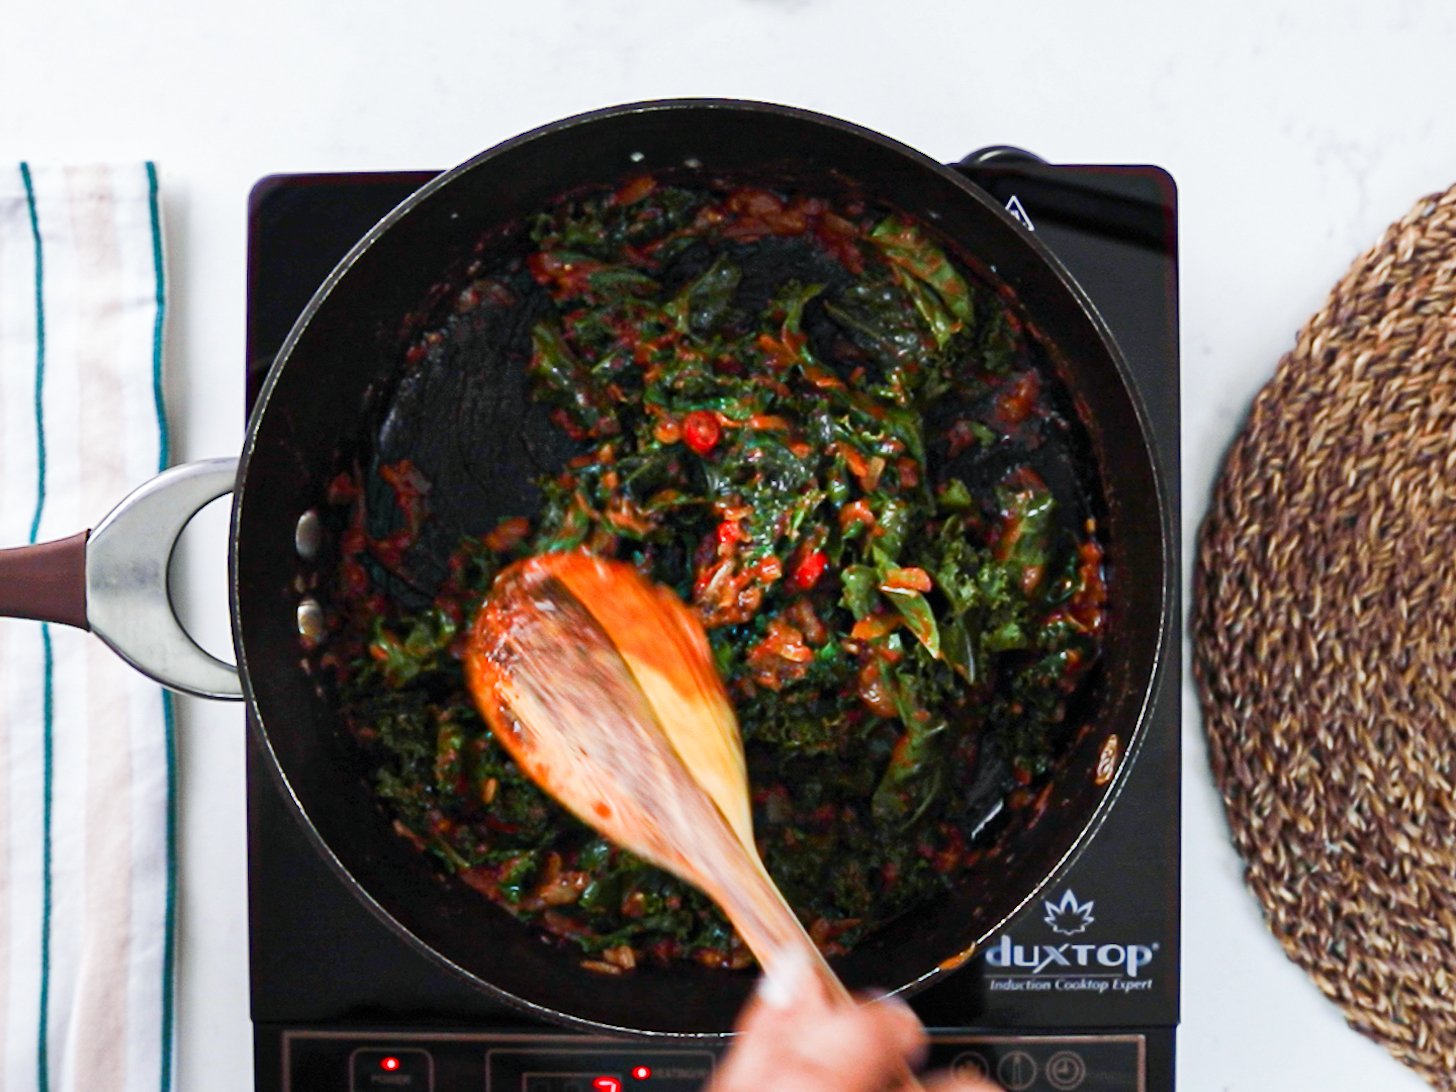 A hand stirring fresh kale in a pan with tomato sauce.